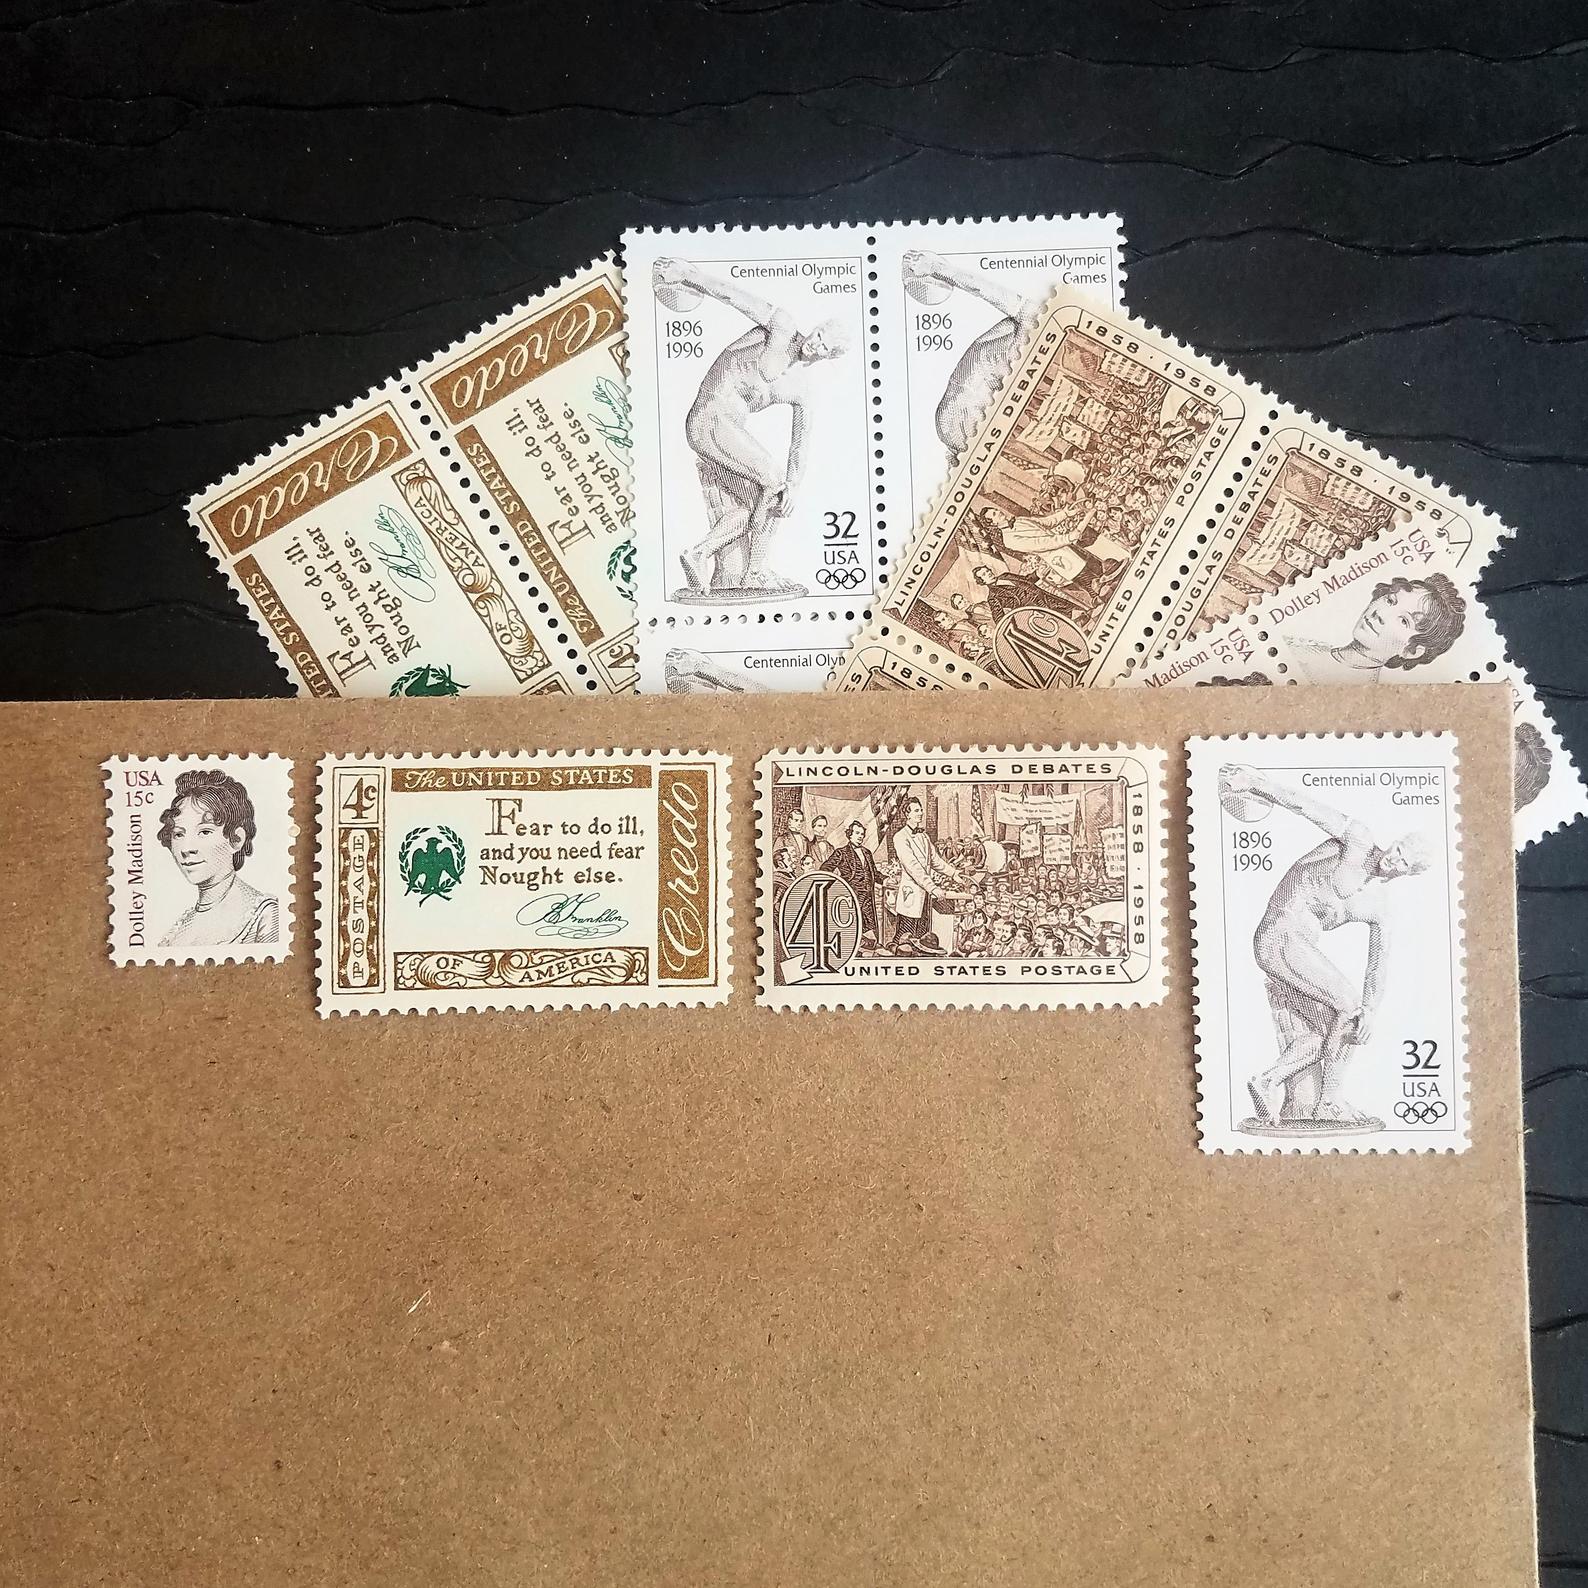 JADETREE STAMP — USPS SHEET of 20 VINTAGE ROSE First Class Postage Forever  stamps for Wedding Invitations